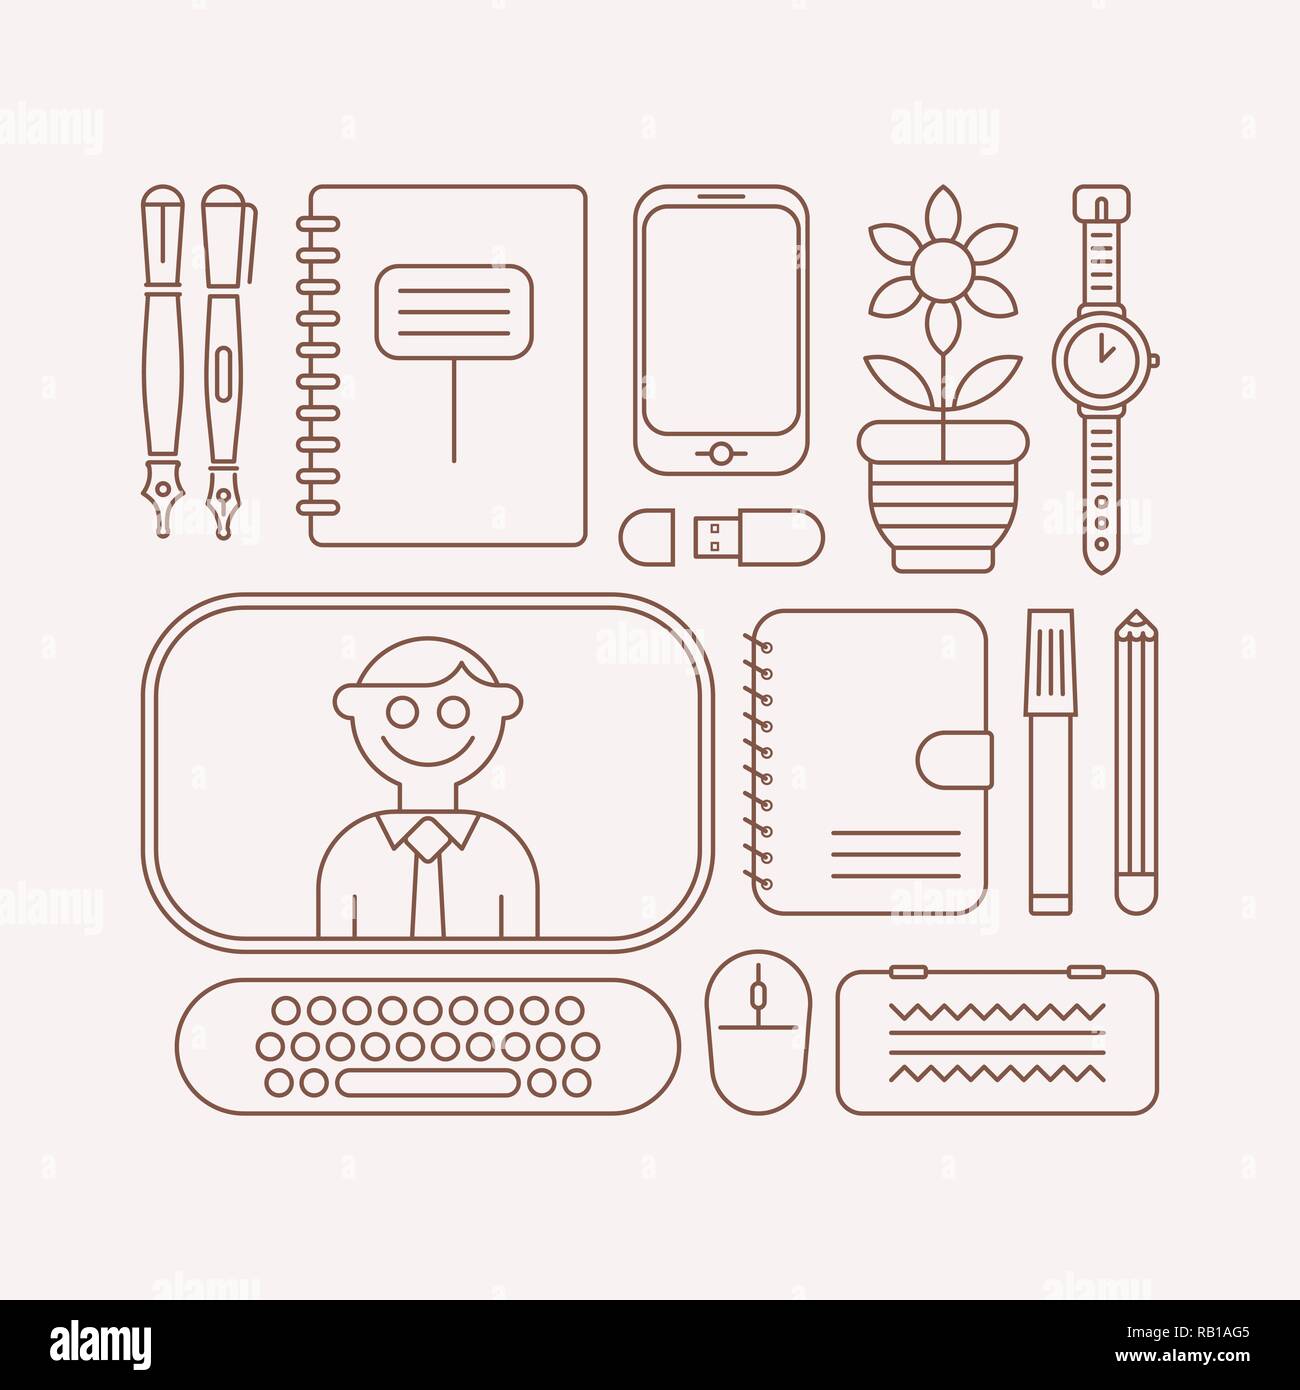 Line art image on a light background Workplace vector illustration. Design of many various school supplies. Stock Vector